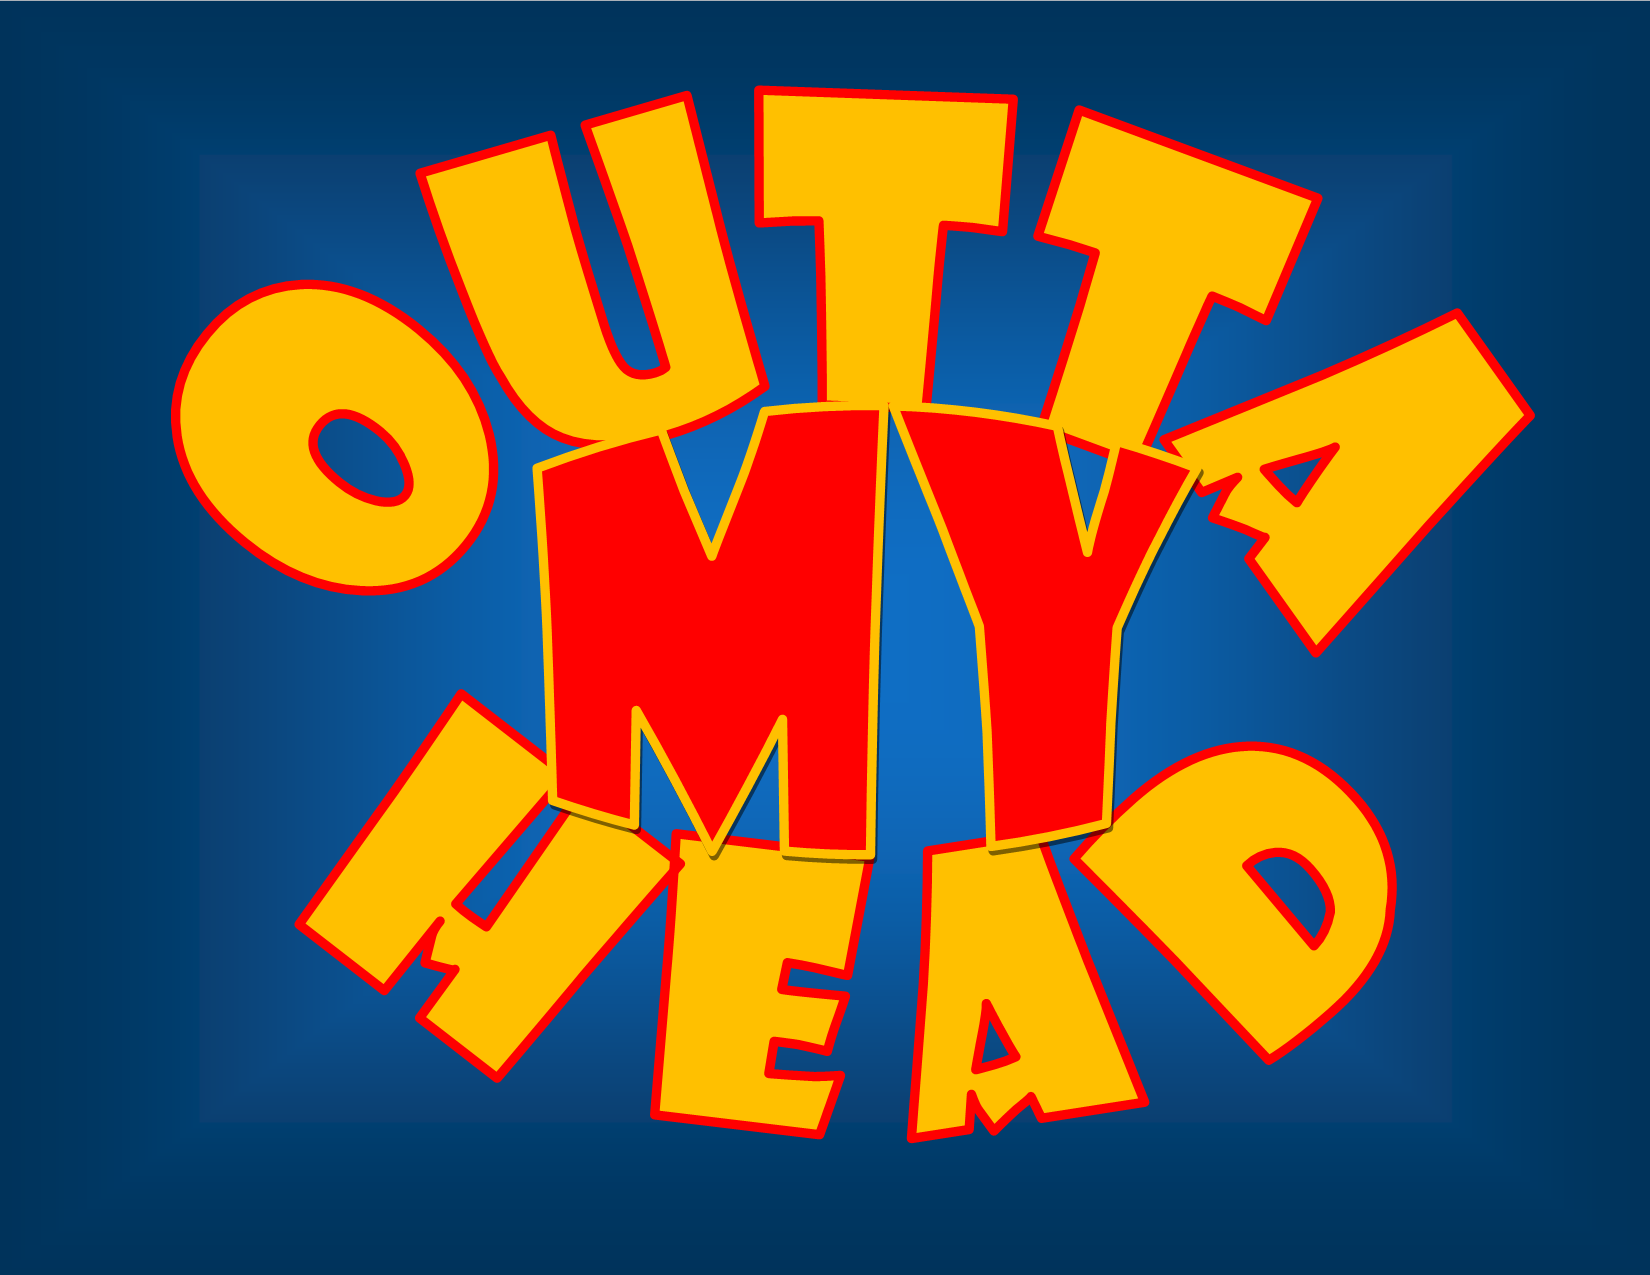 G33kpod Presents: Outta my Head Episode 2: Meet the Overlords